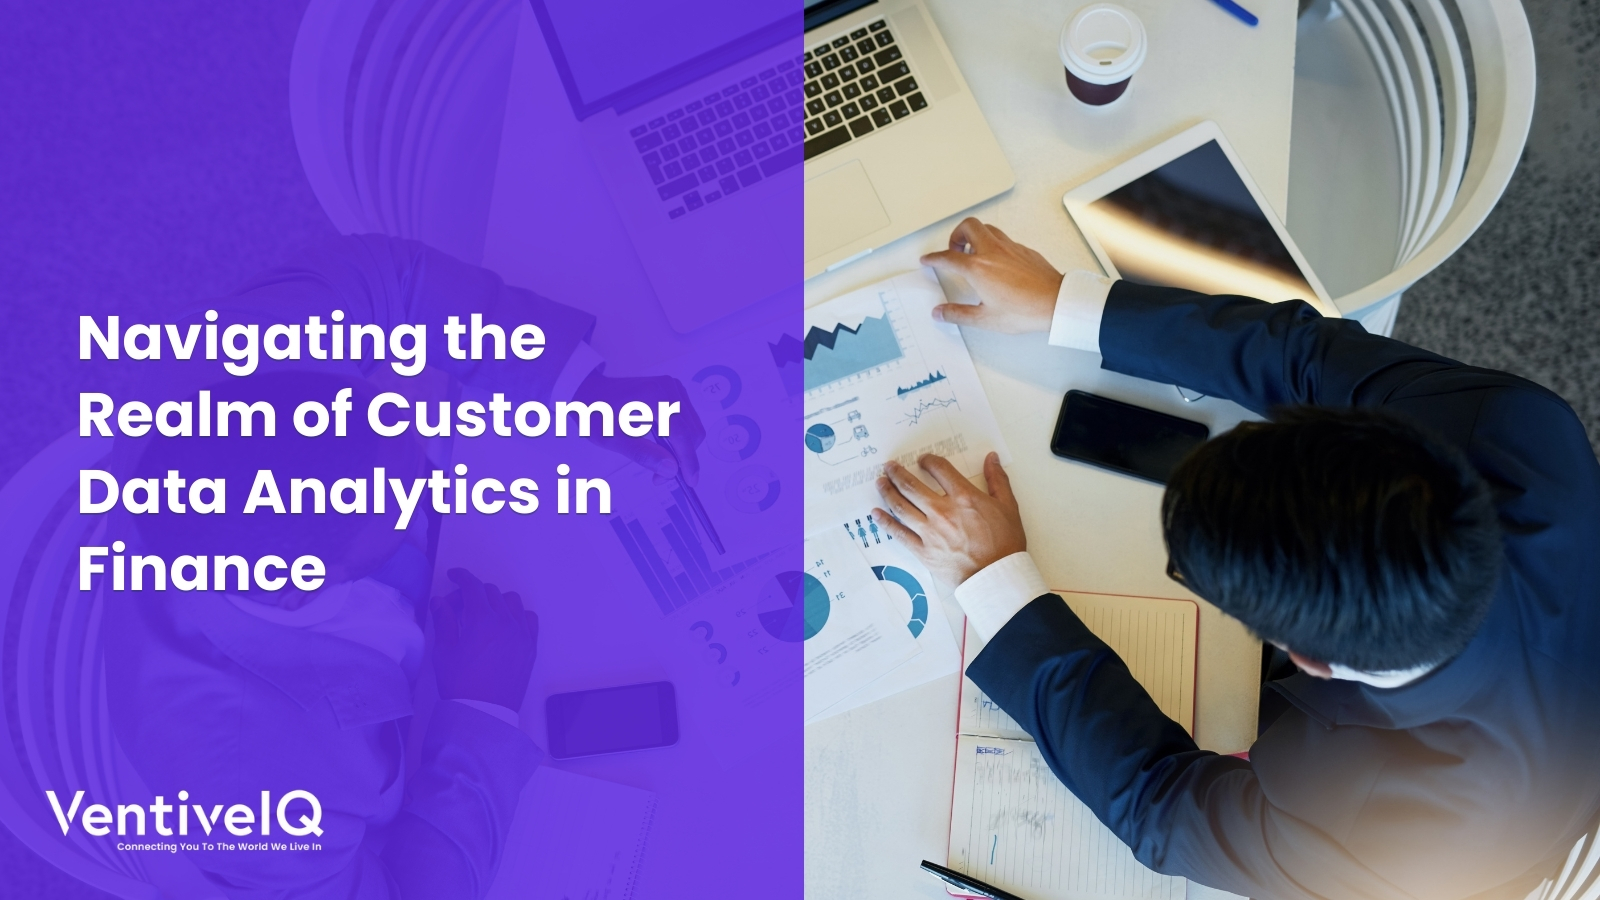 Navigating the Realm of Customer Data Analytics in Finance